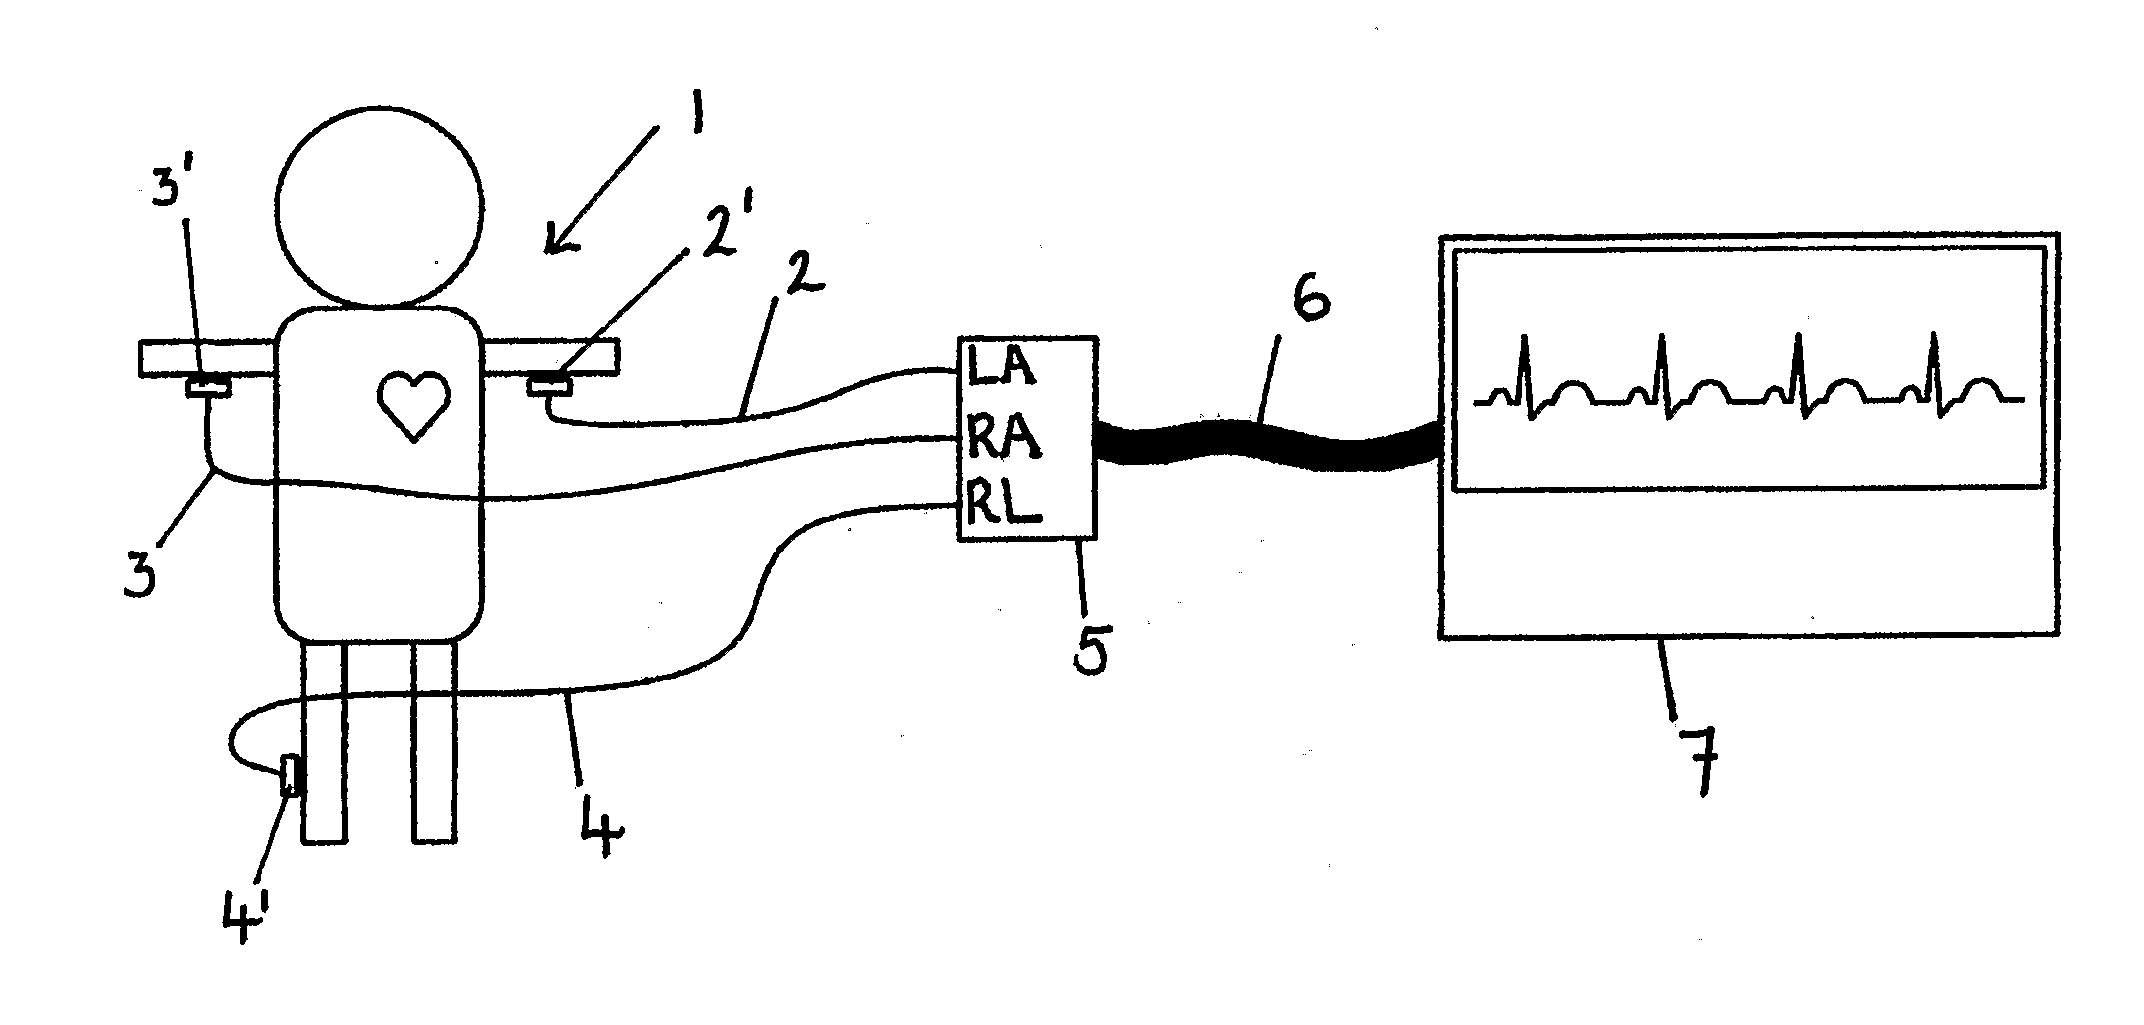 Apparatus for detecting the position of a percutaneously-inserted intravenous catheter